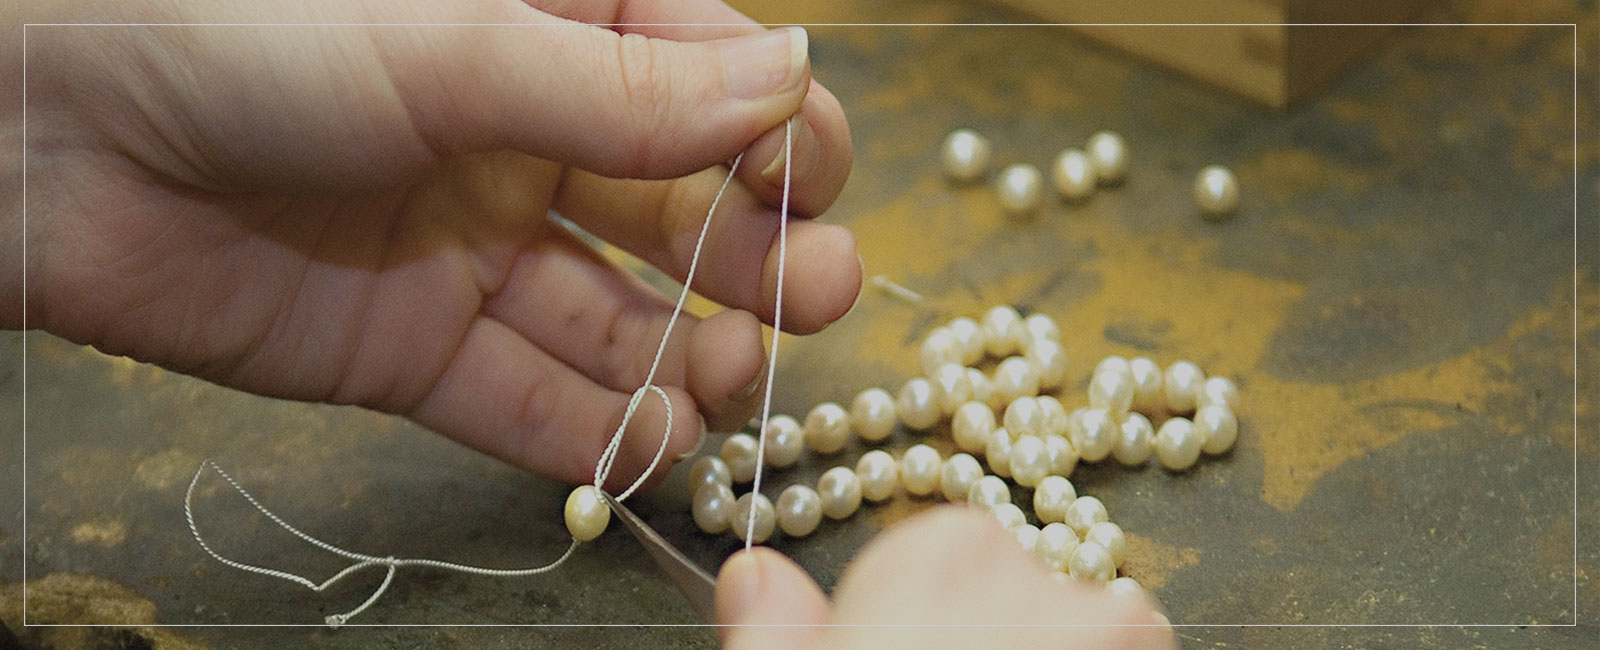 Person restringing pearls on a necklace